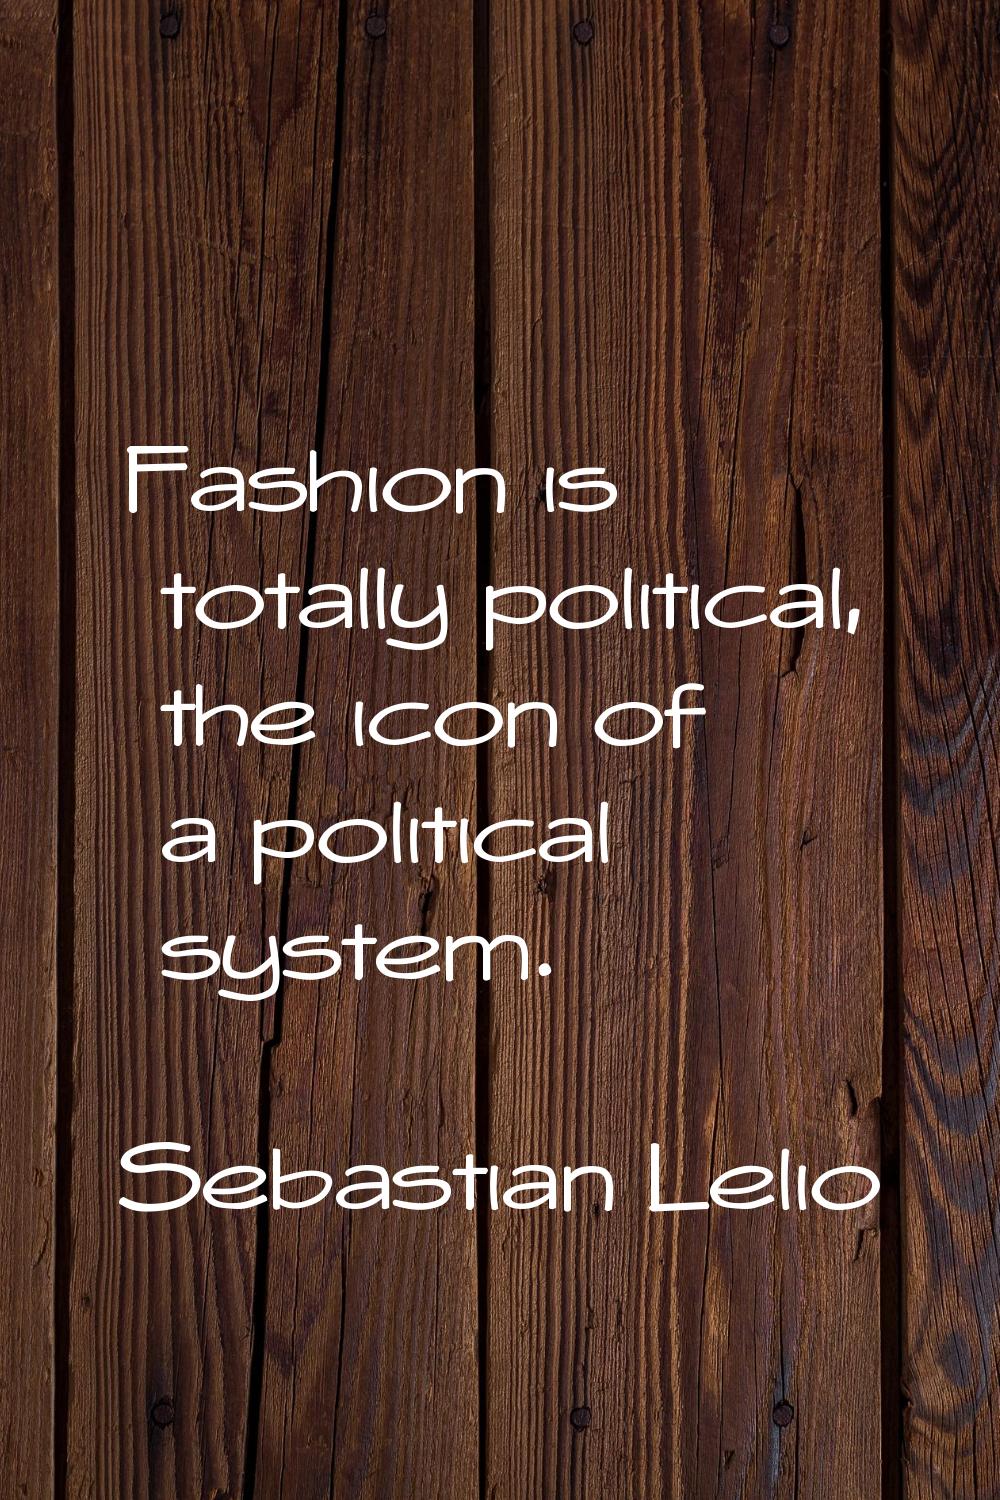 Fashion is totally political, the icon of a political system.